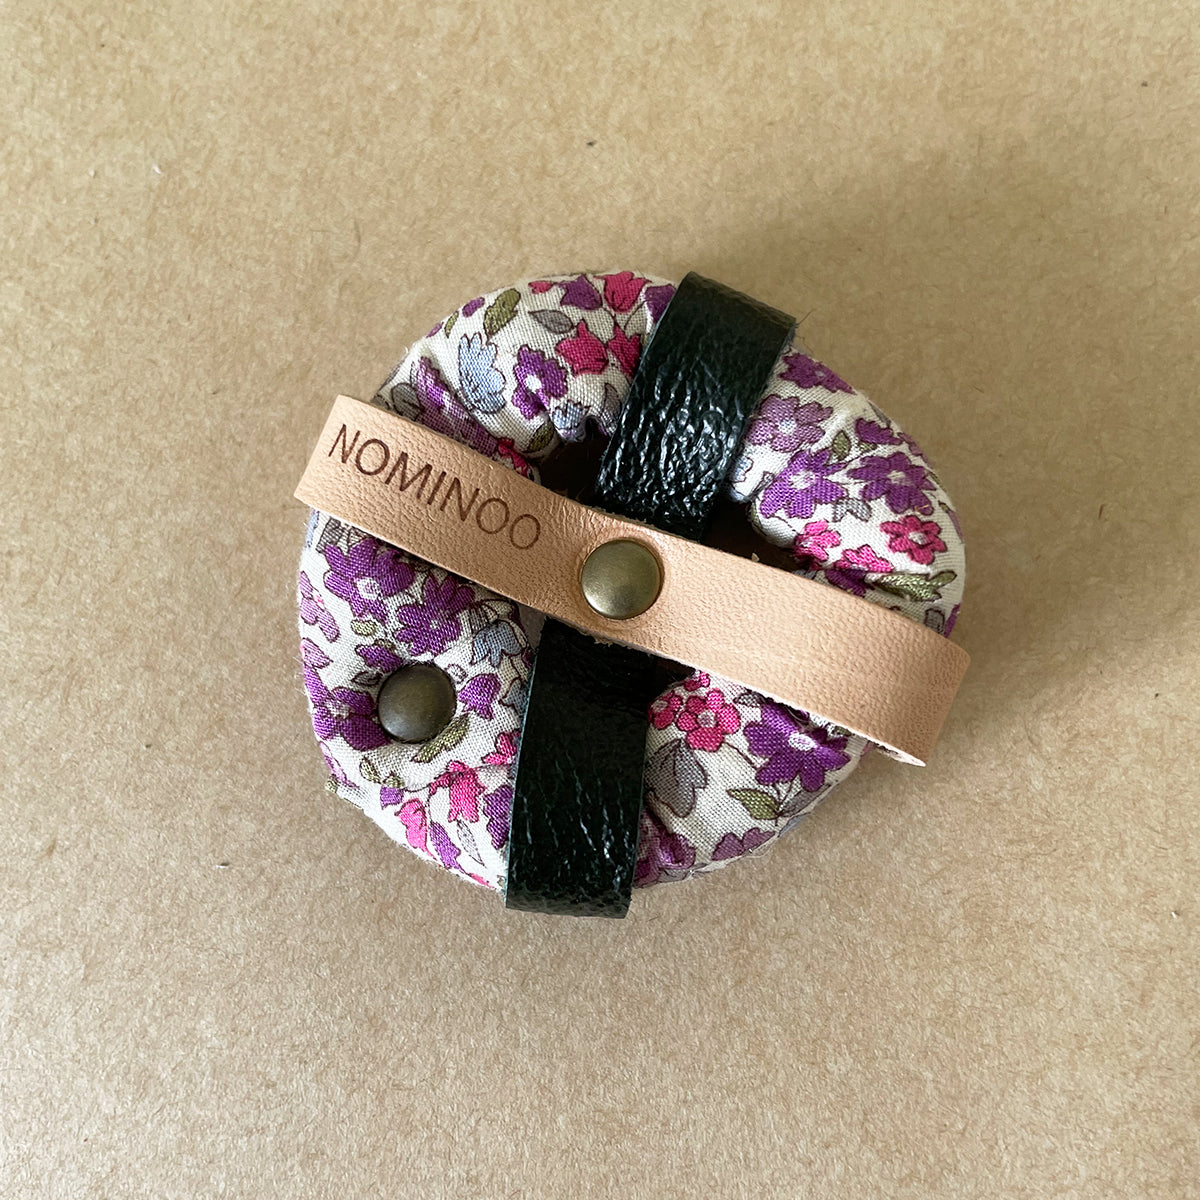 Nominoo Catnip Donut Toy, Handmade With Recycled Leather & Floral Fabric | at Made Moggie